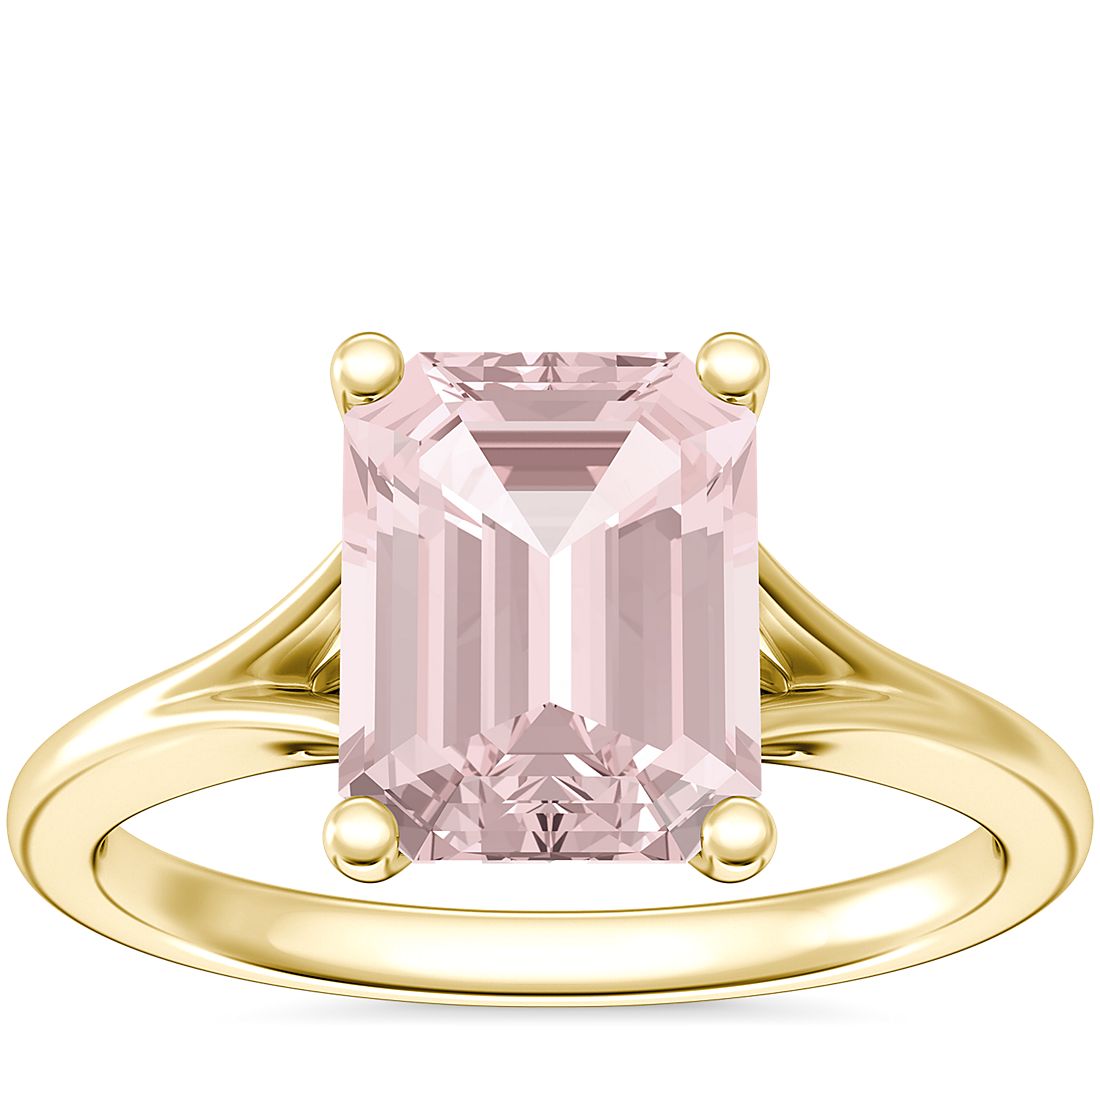 Petite Split Shank Solitaire Engagement Ring with Emerald-Cut Morganite in 14k Yellow Gold (9x7mm)